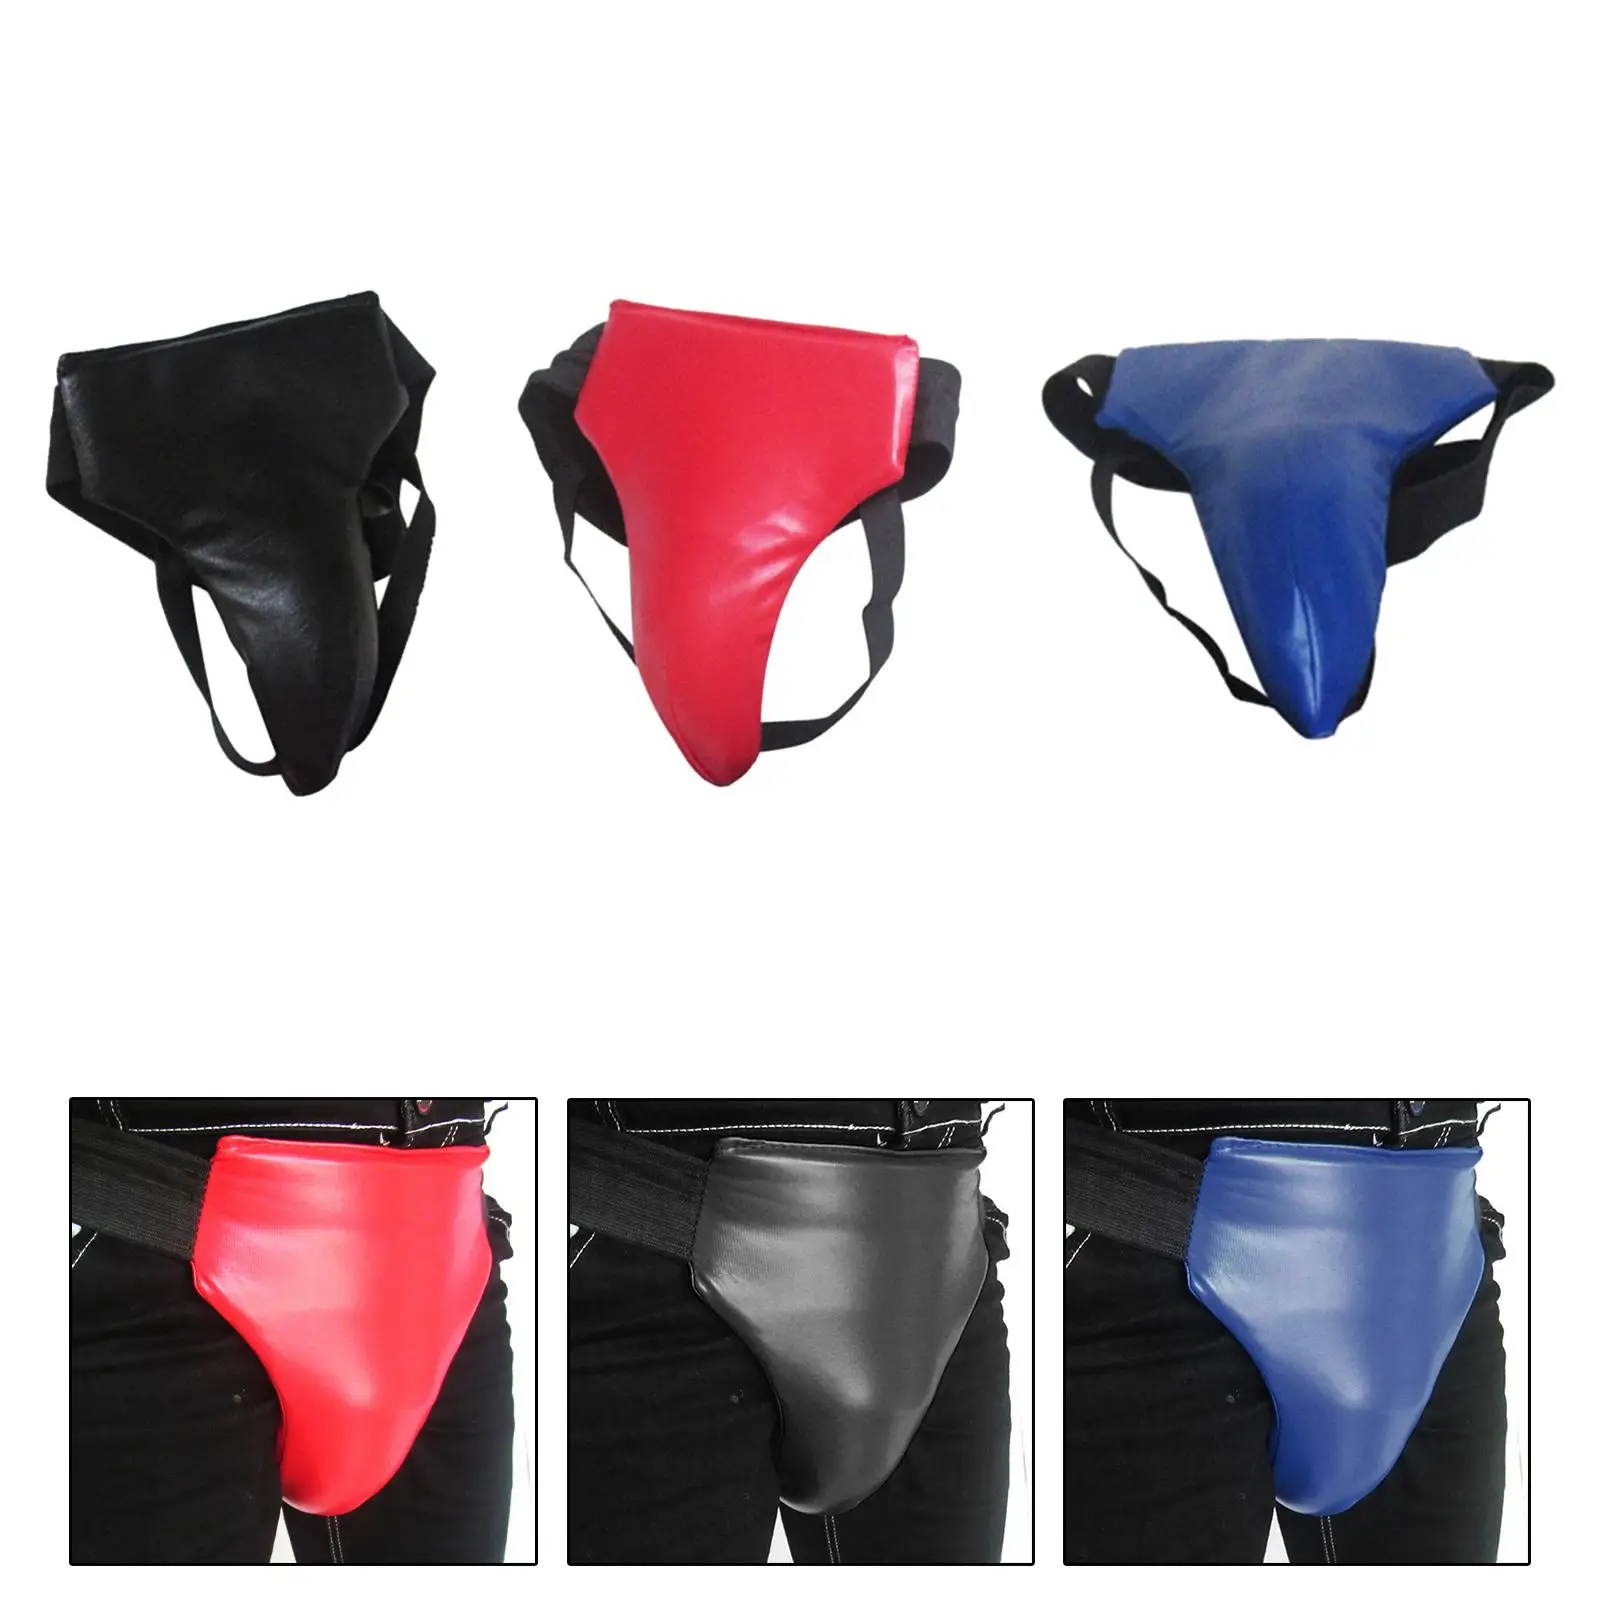 Taekwondo Groin Protector Safety Cup Pocket Training Equipment Groin Protector Cup for Sanda Sports Grappling Kickboxing Karate